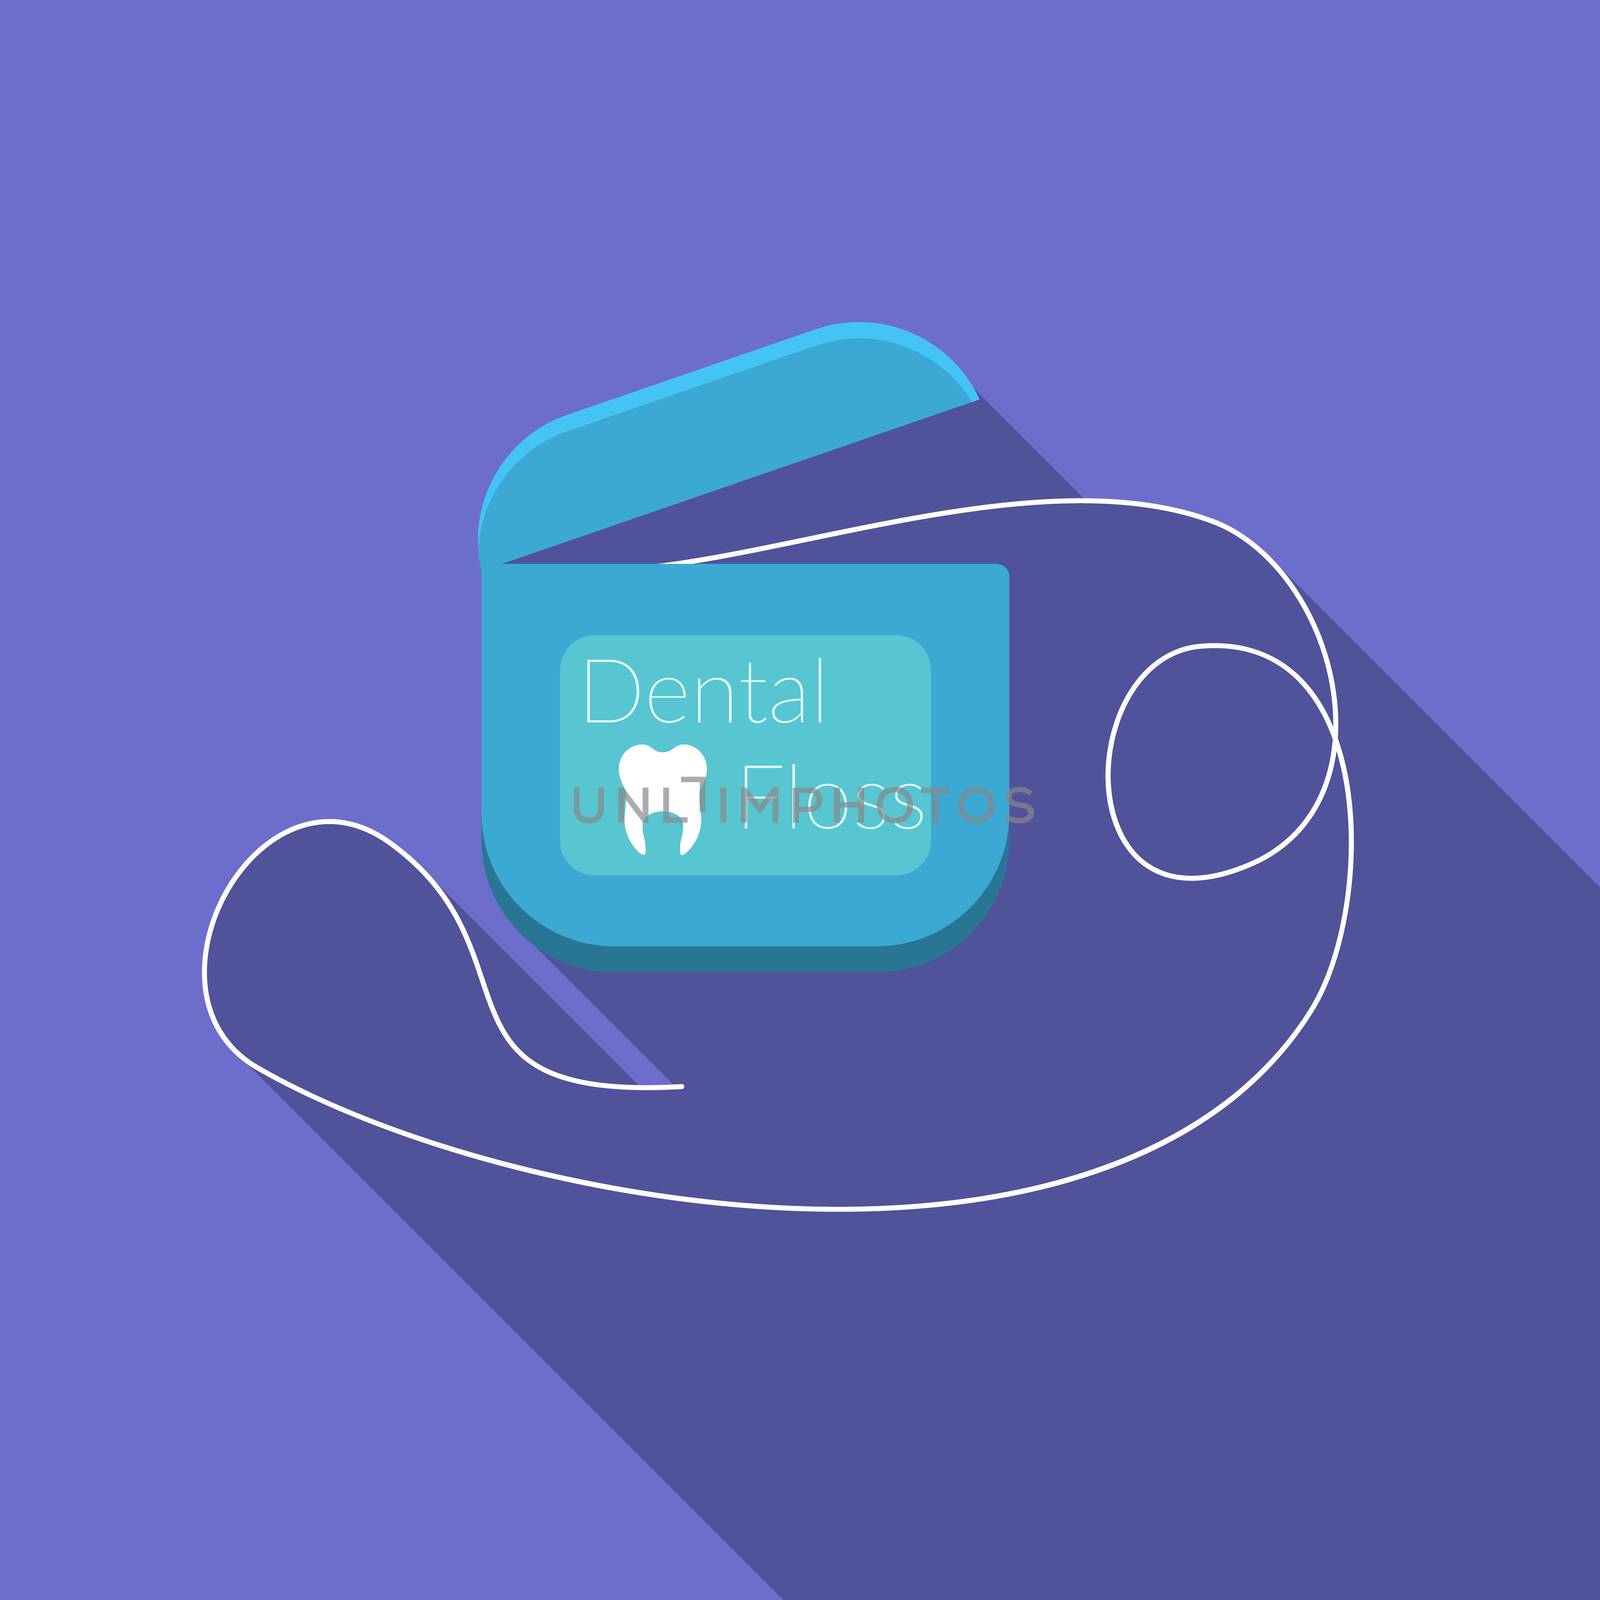 Flat design modern vector illustration of dental floss icon with long shadow by Lemon_workshop